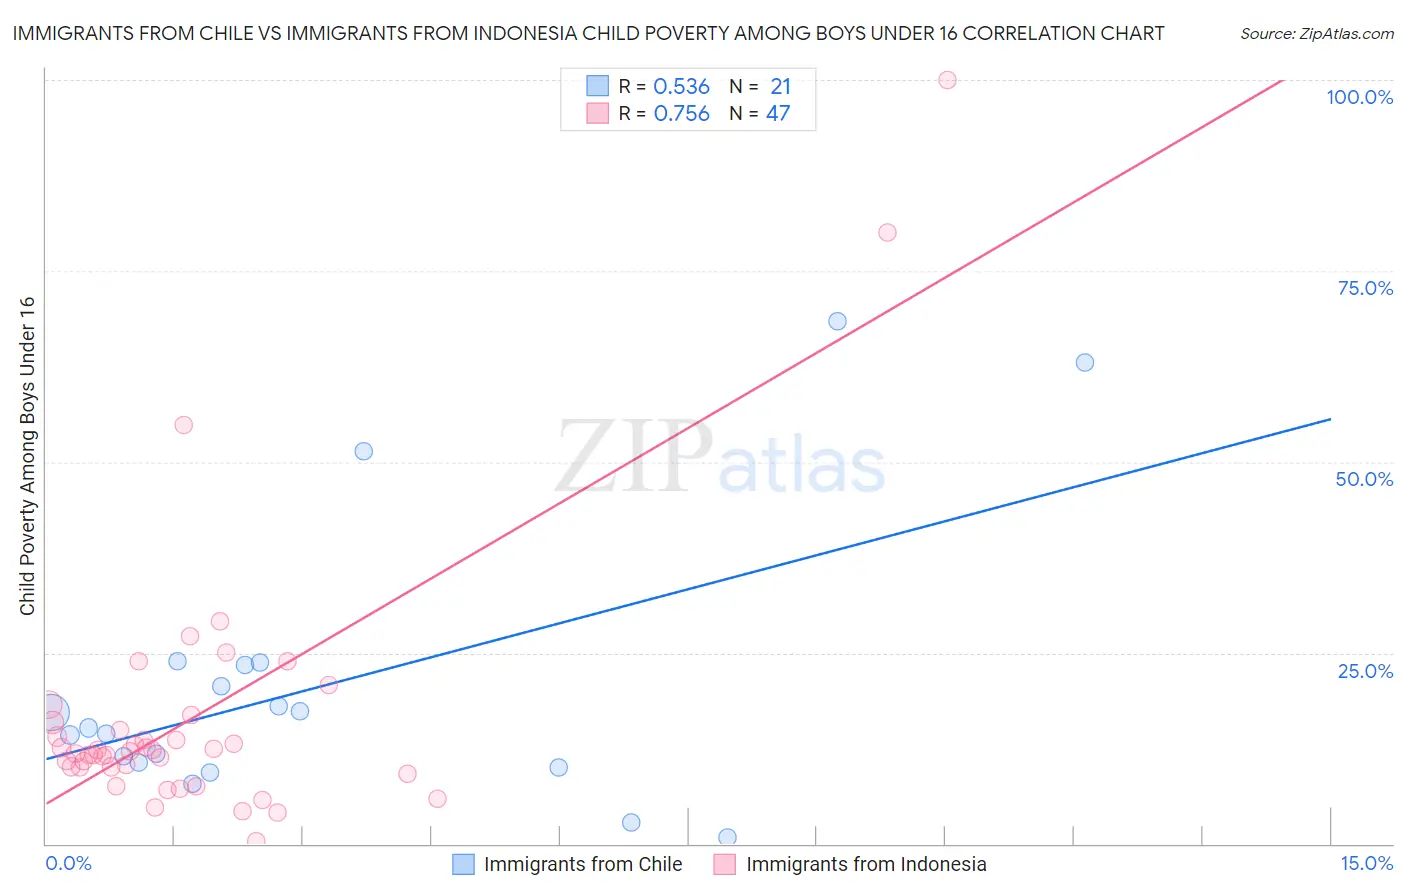 Immigrants from Chile vs Immigrants from Indonesia Child Poverty Among Boys Under 16